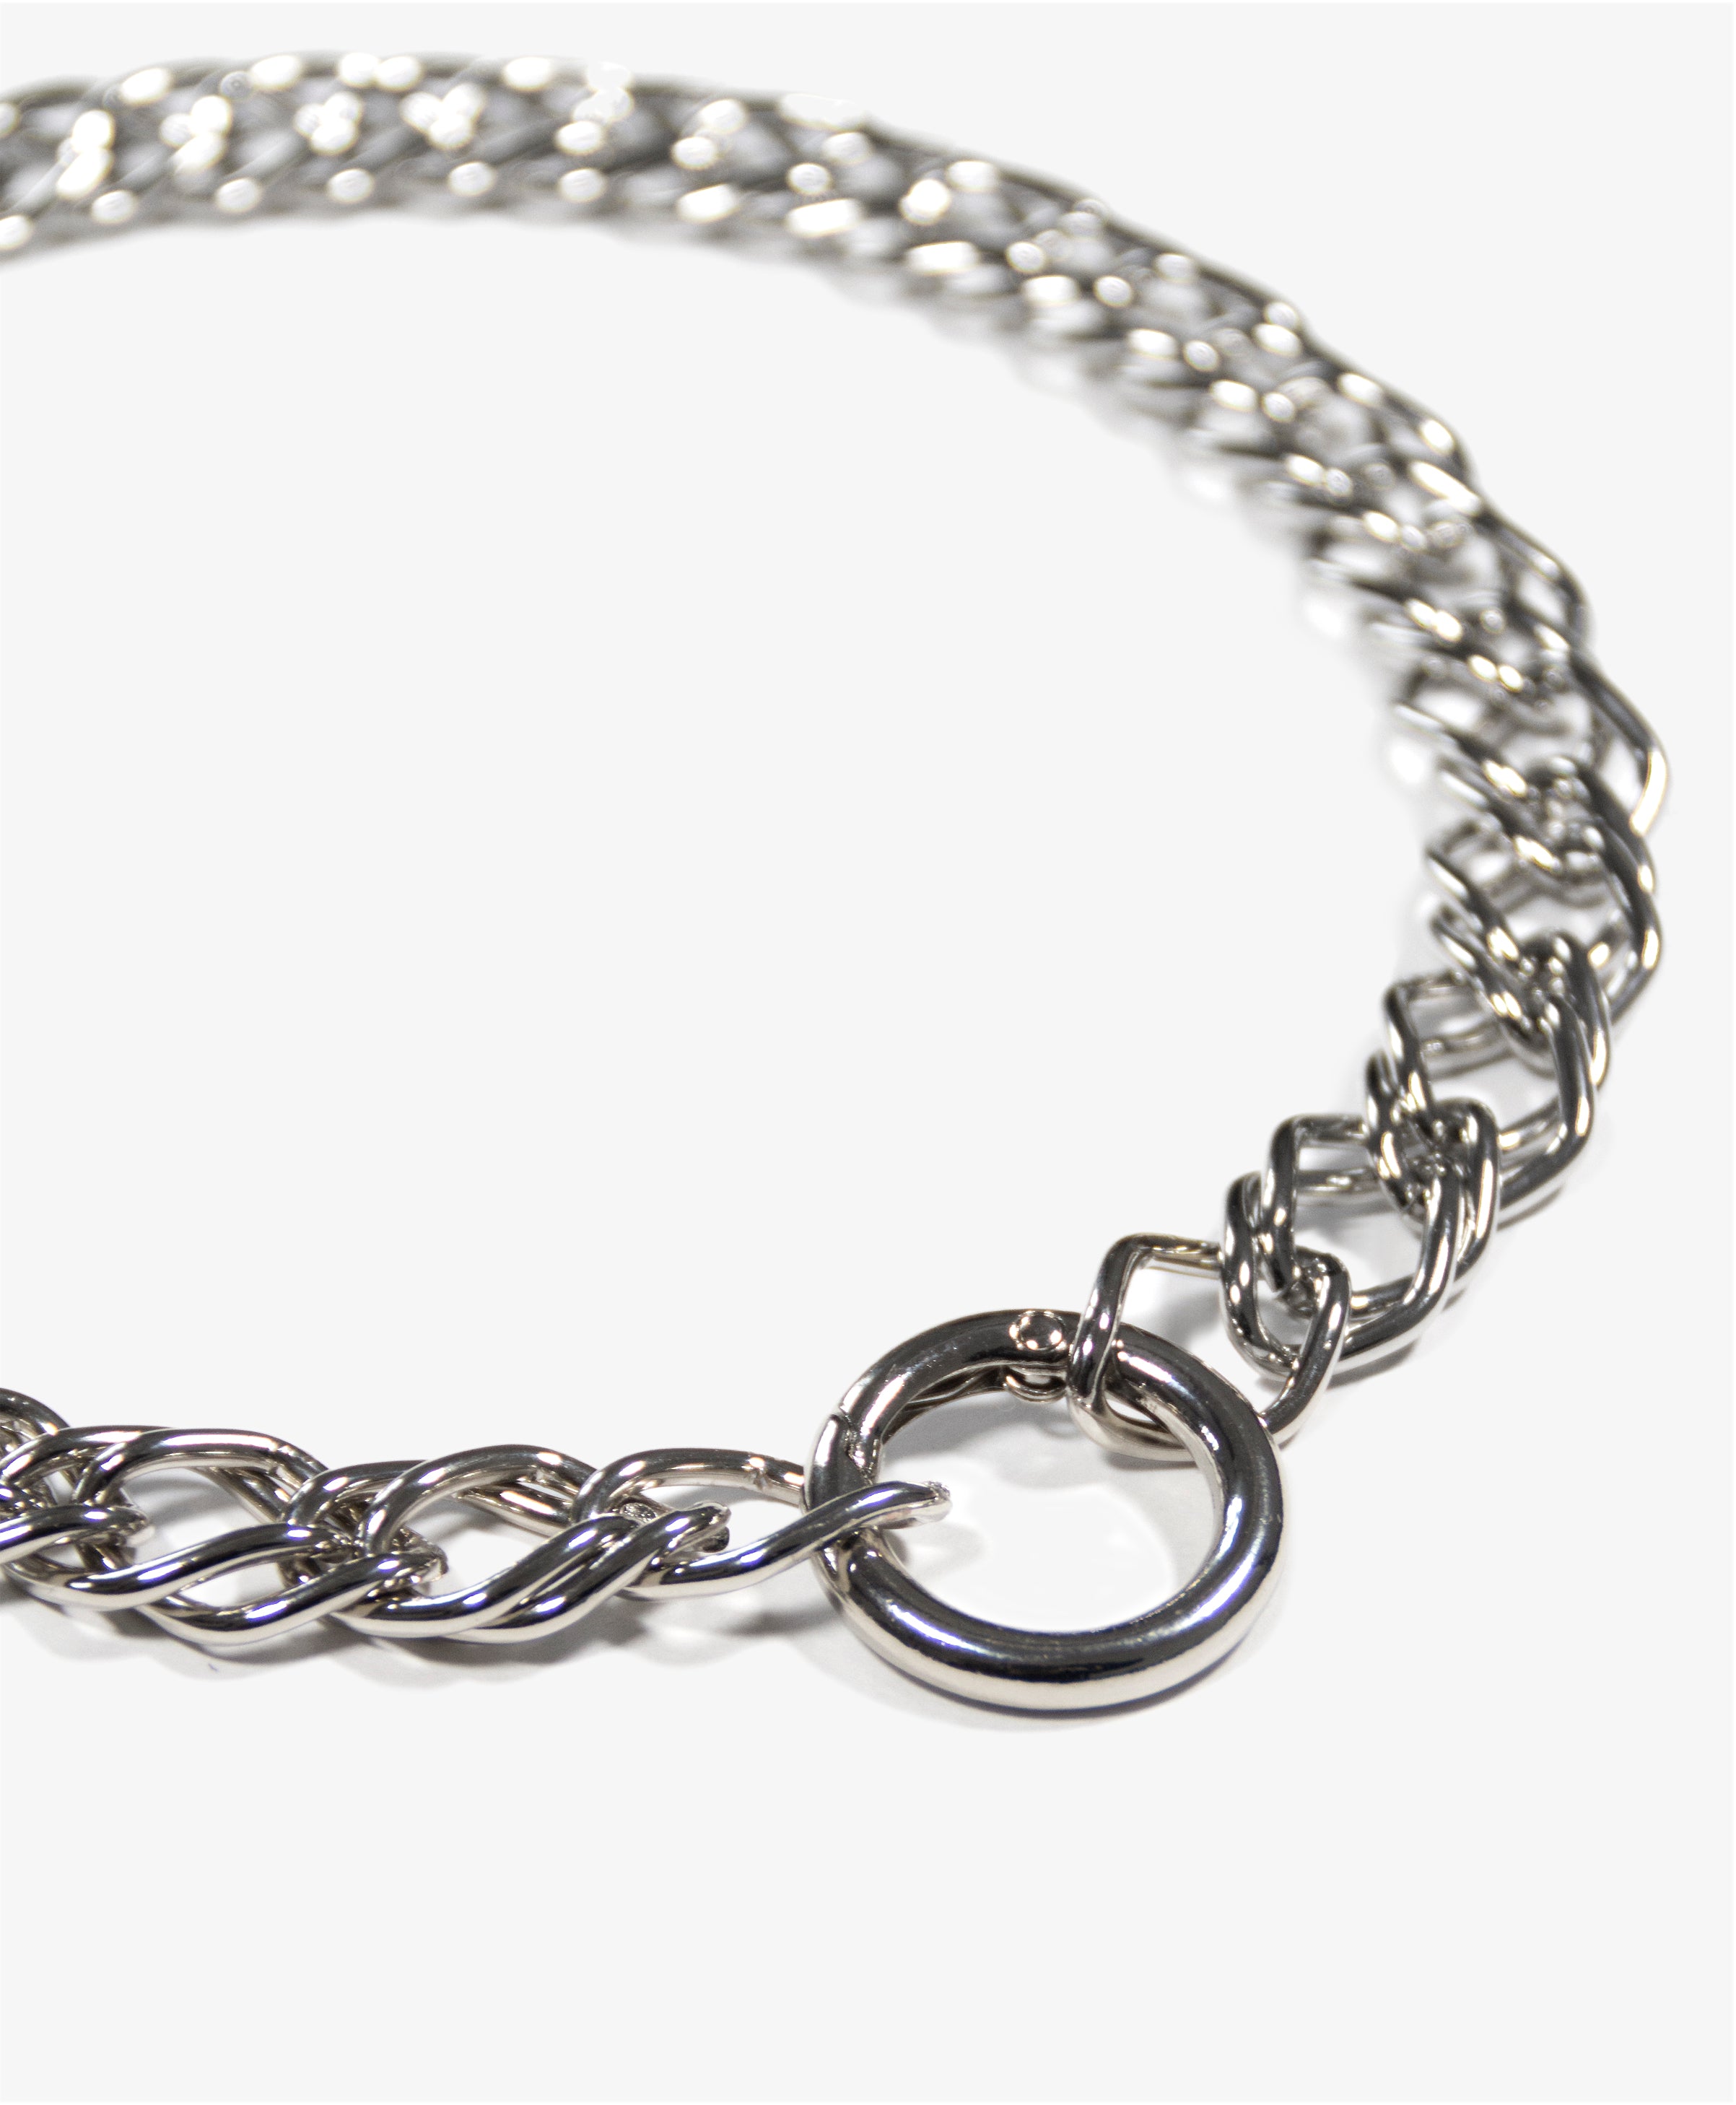 llayers-mens-women-jewelry-silver-stainlesssteel-choker-chain-necklace-unchained-005-Brooklyn-New-York-2